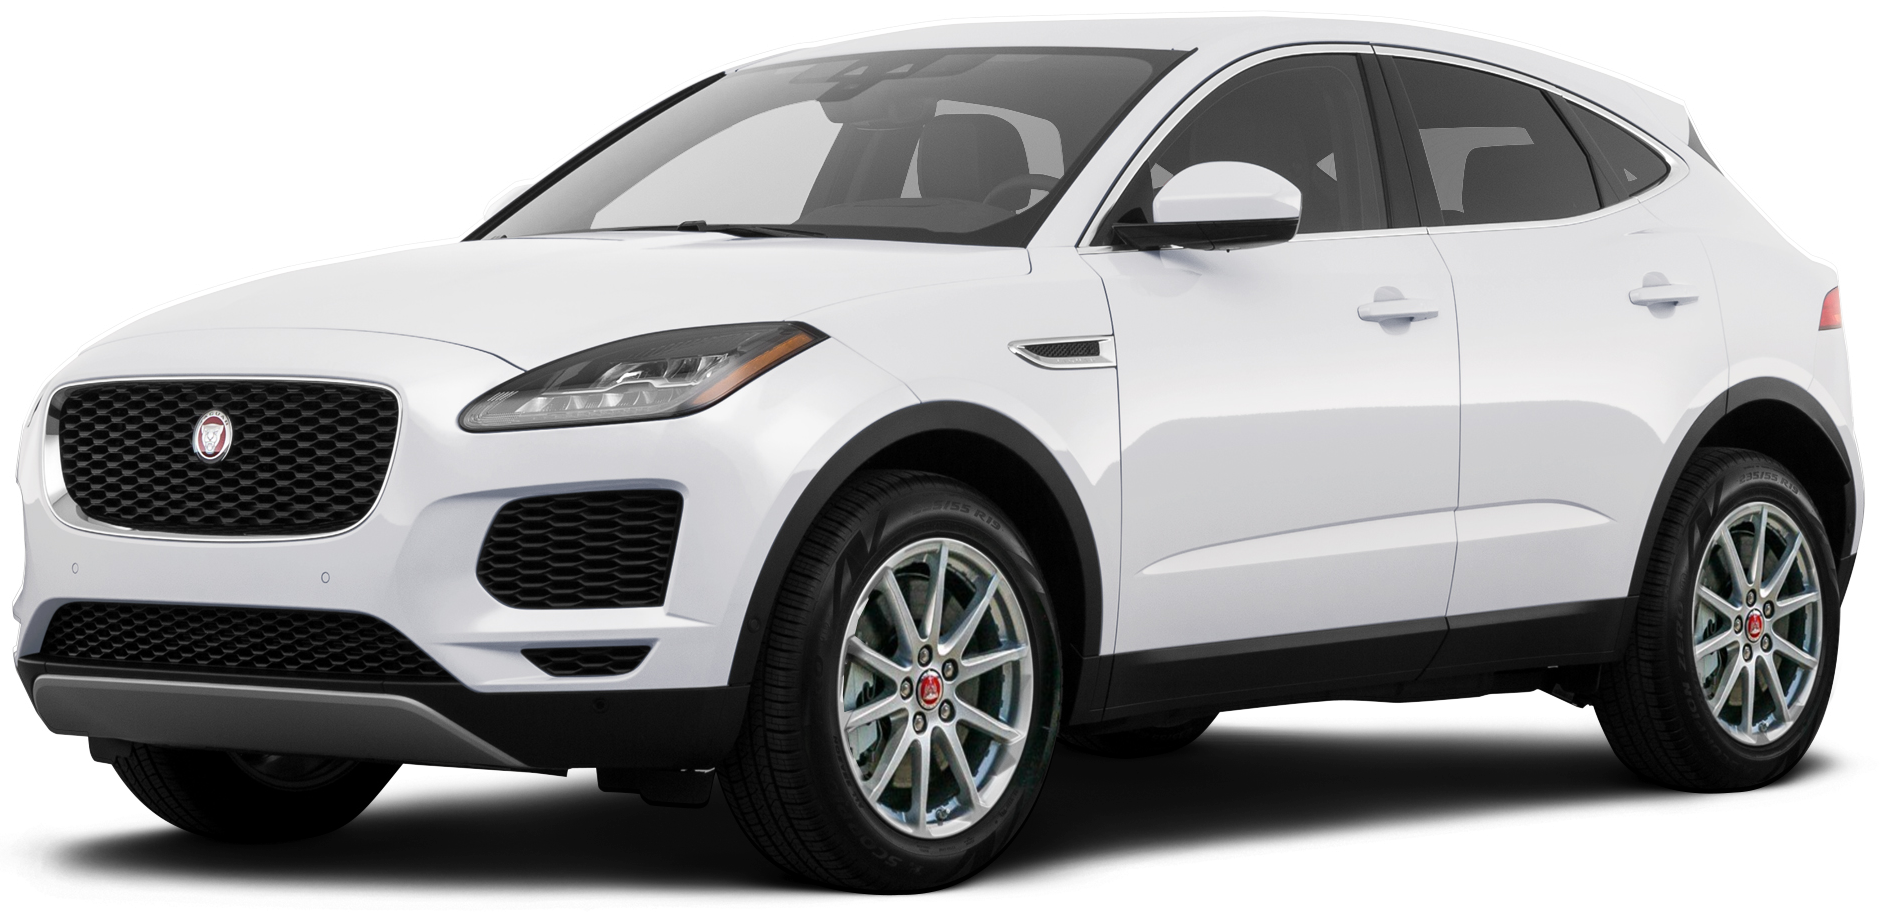 2020 Jaguar E-PACE Incentives, Specials & Offers in Creve Coeur MO